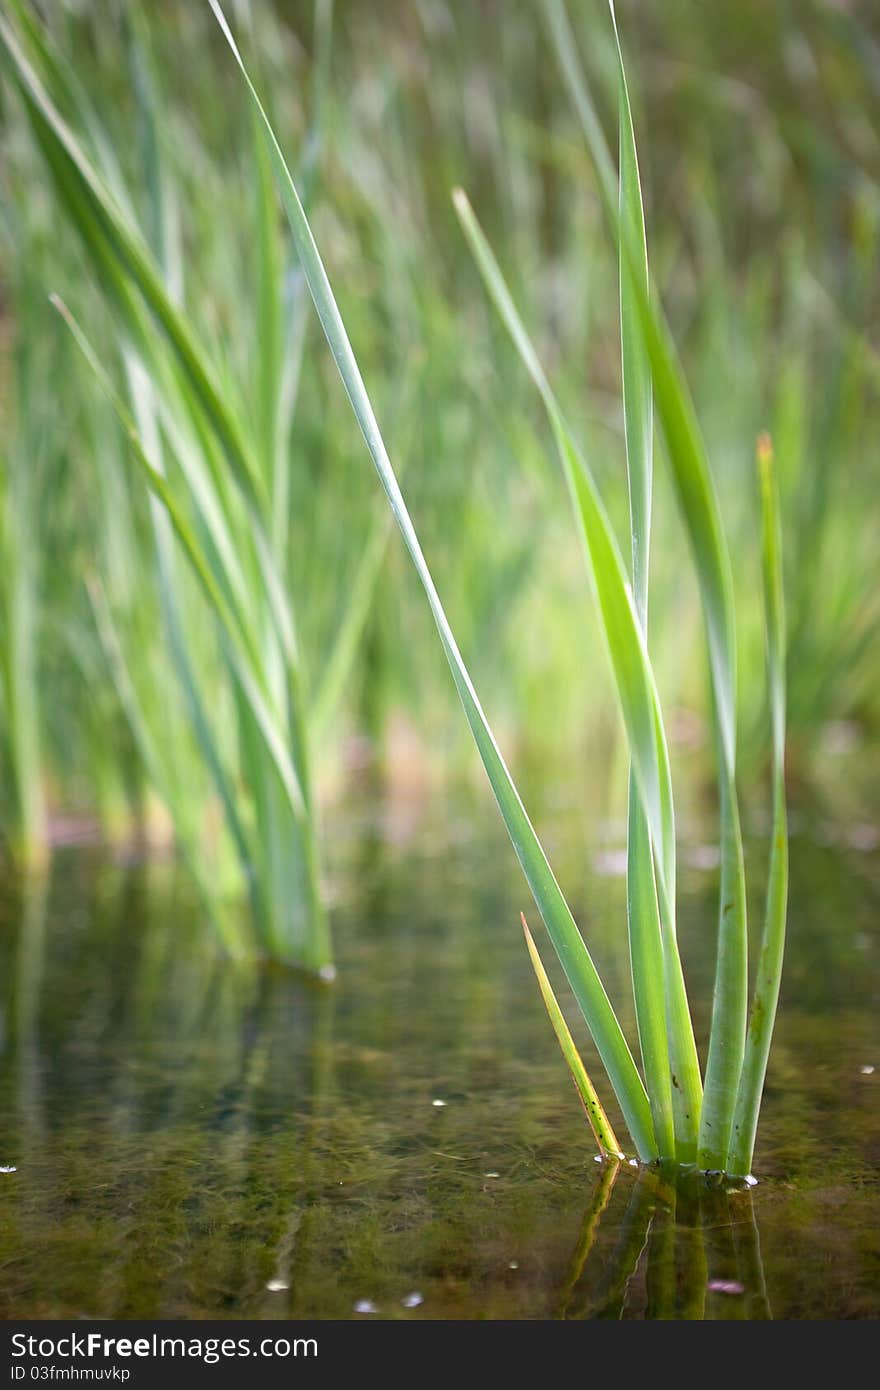 Reeds growing in a shallow river - portrait exterior